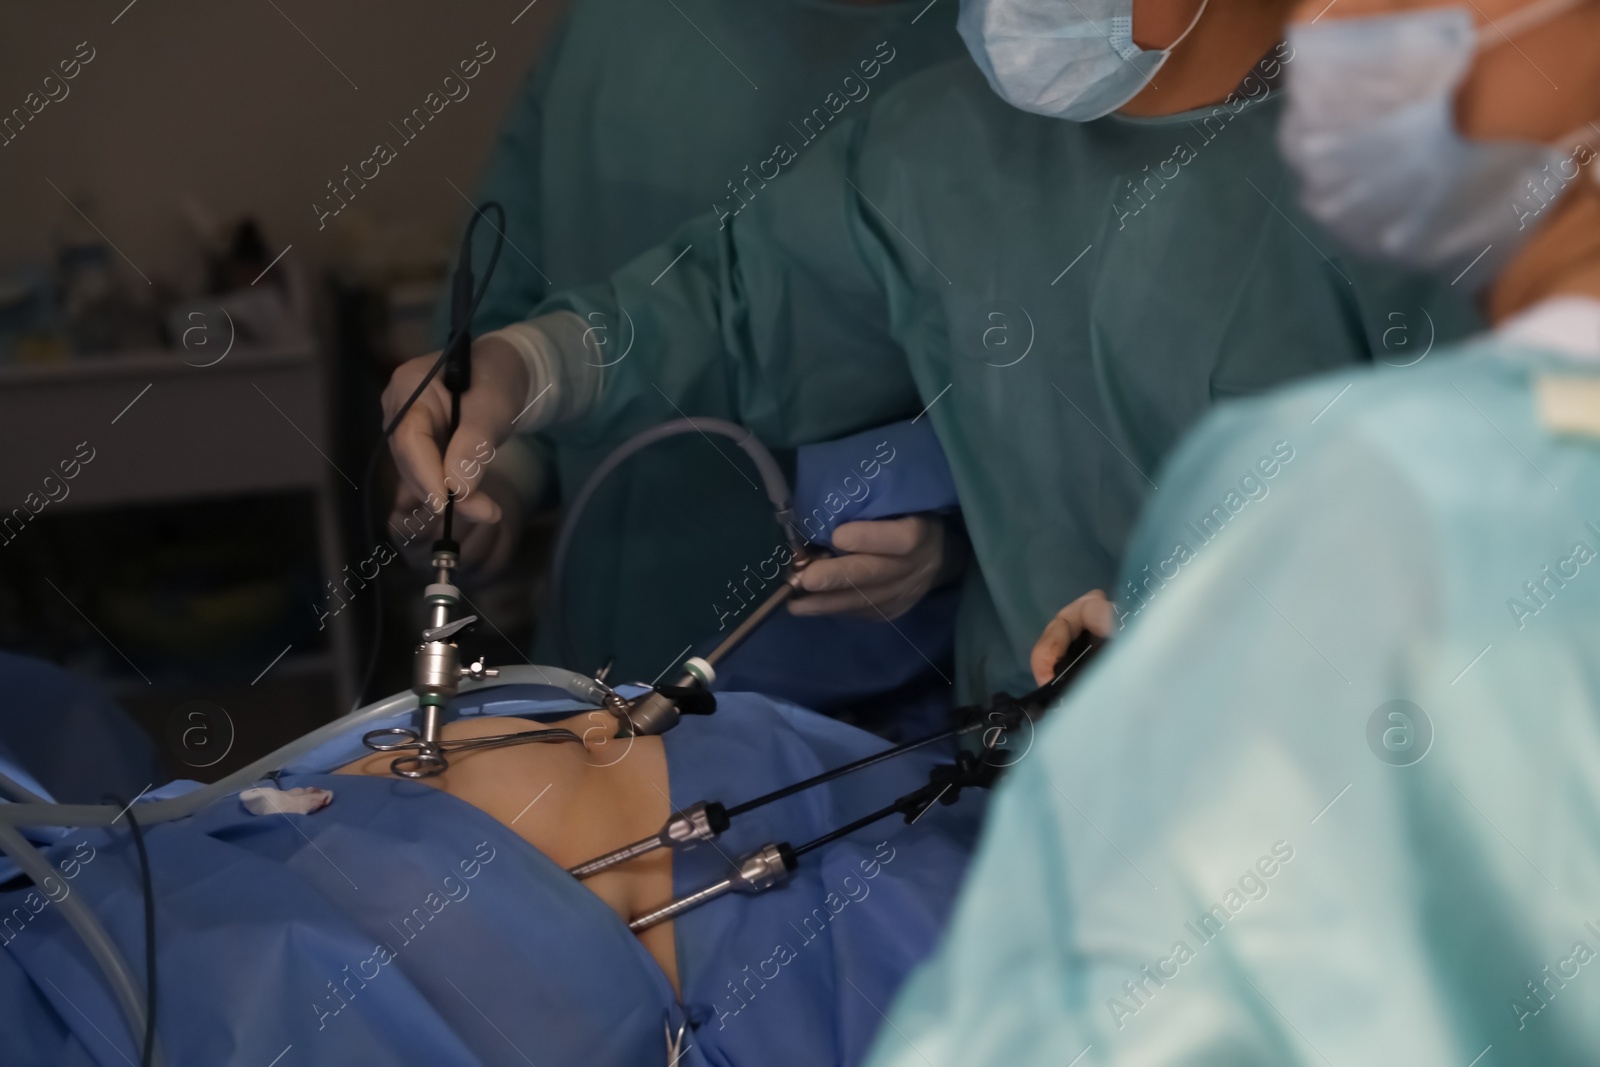 Photo of Medical team performing surgery in operating room, closeup